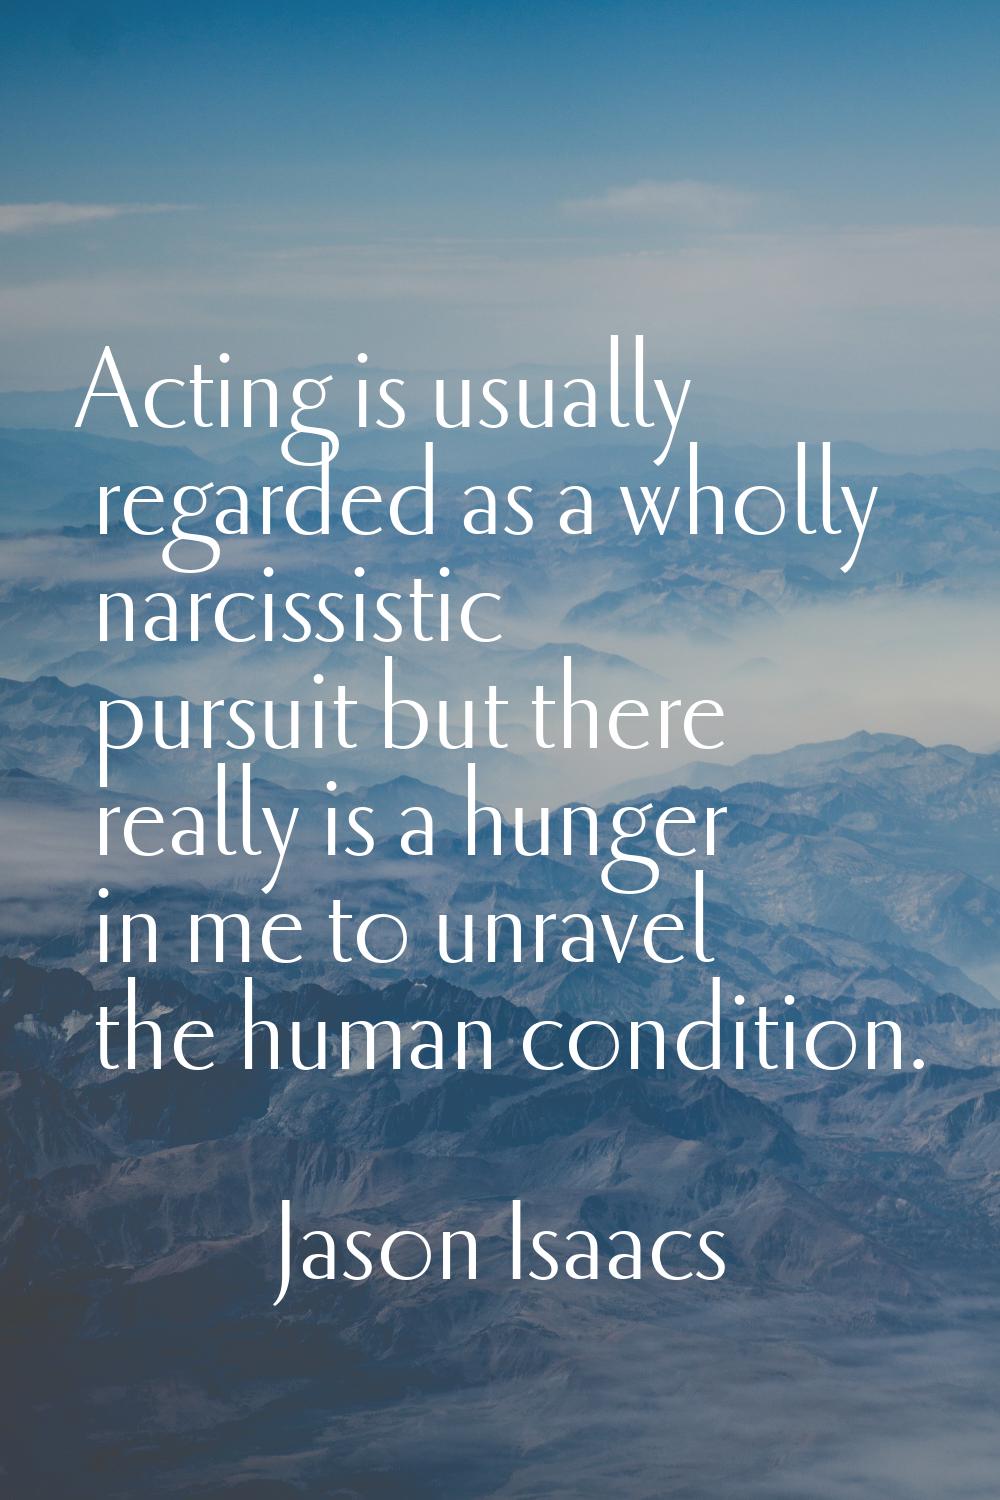 Acting is usually regarded as a wholly narcissistic pursuit but there really is a hunger in me to u